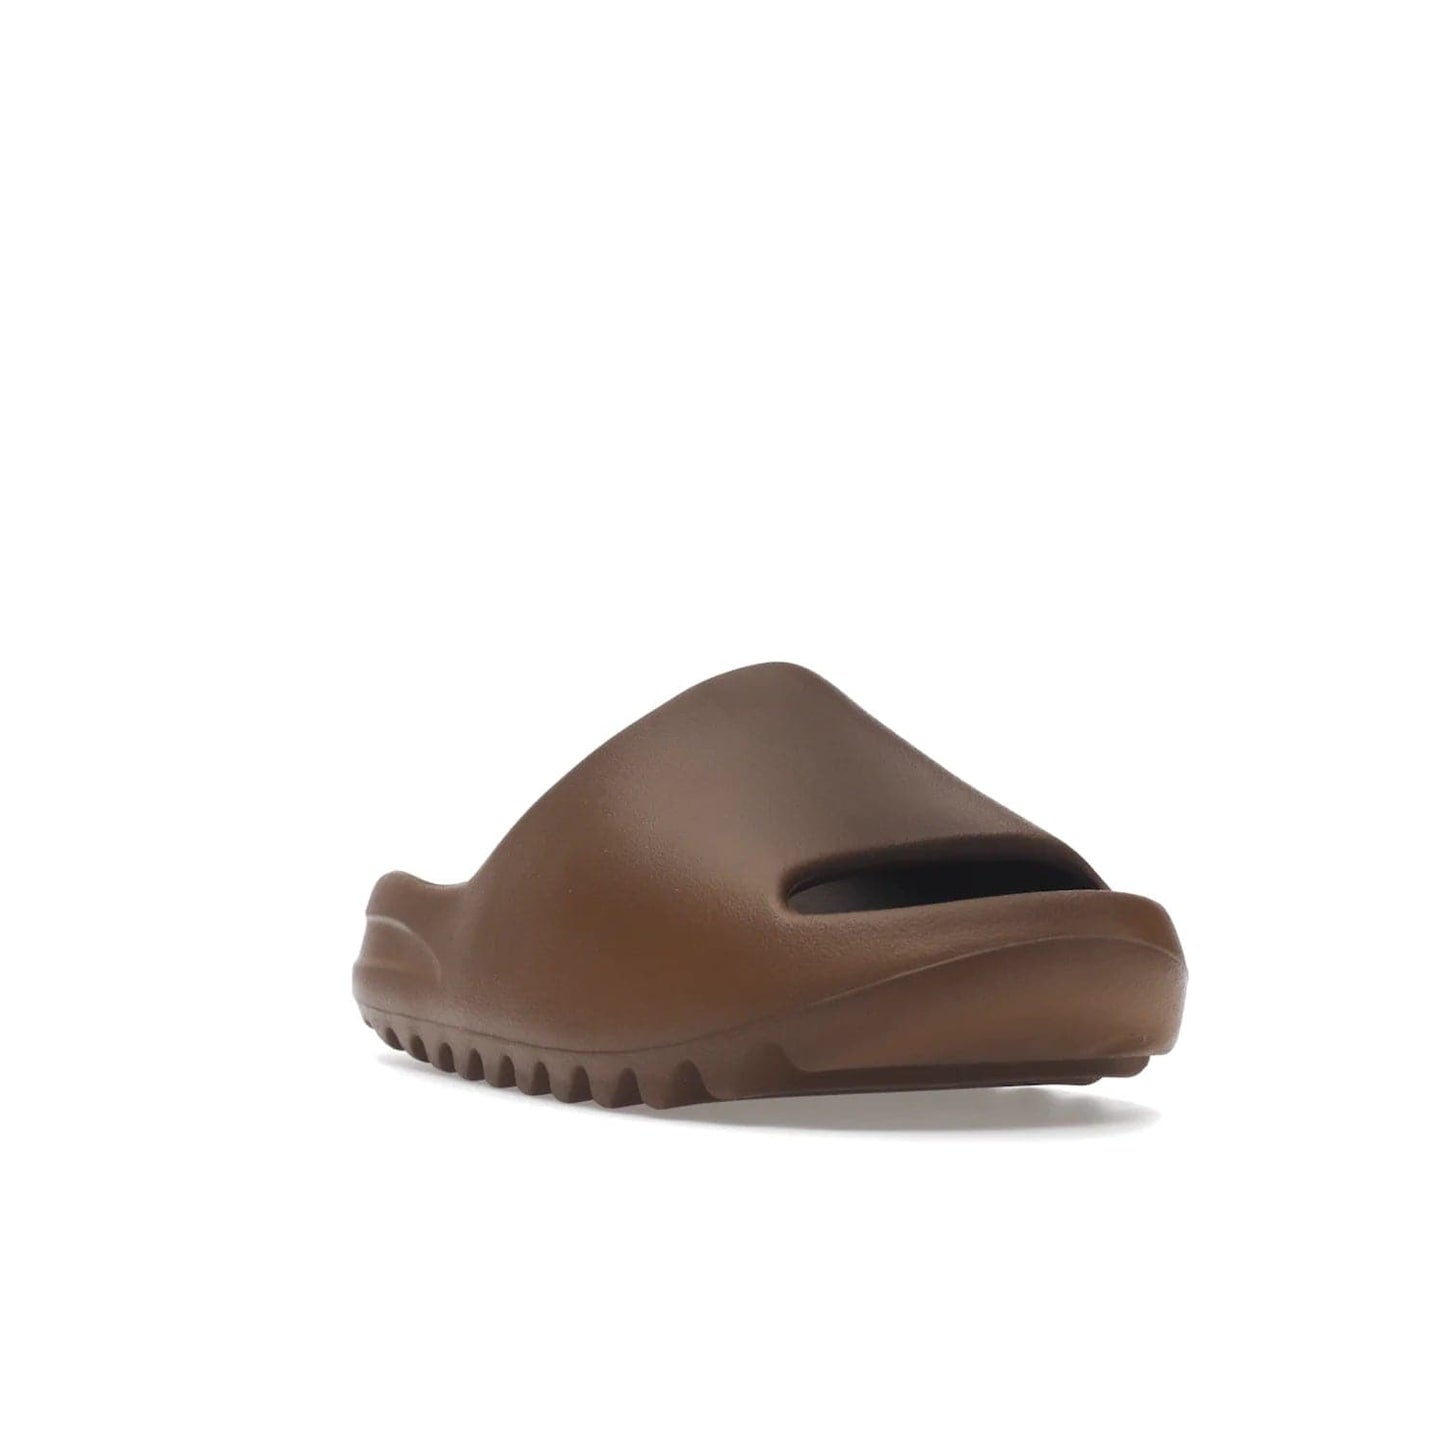 adidas Yeezy Slide Flax - Image 7 - Only at www.BallersClubKickz.com - Score the perfect casual look with the adidas Yeezy Slide Flax. Made with lightweight injected EVA plus horizontal grooves underfoot for traction. Release on August 22, 2022. $70.